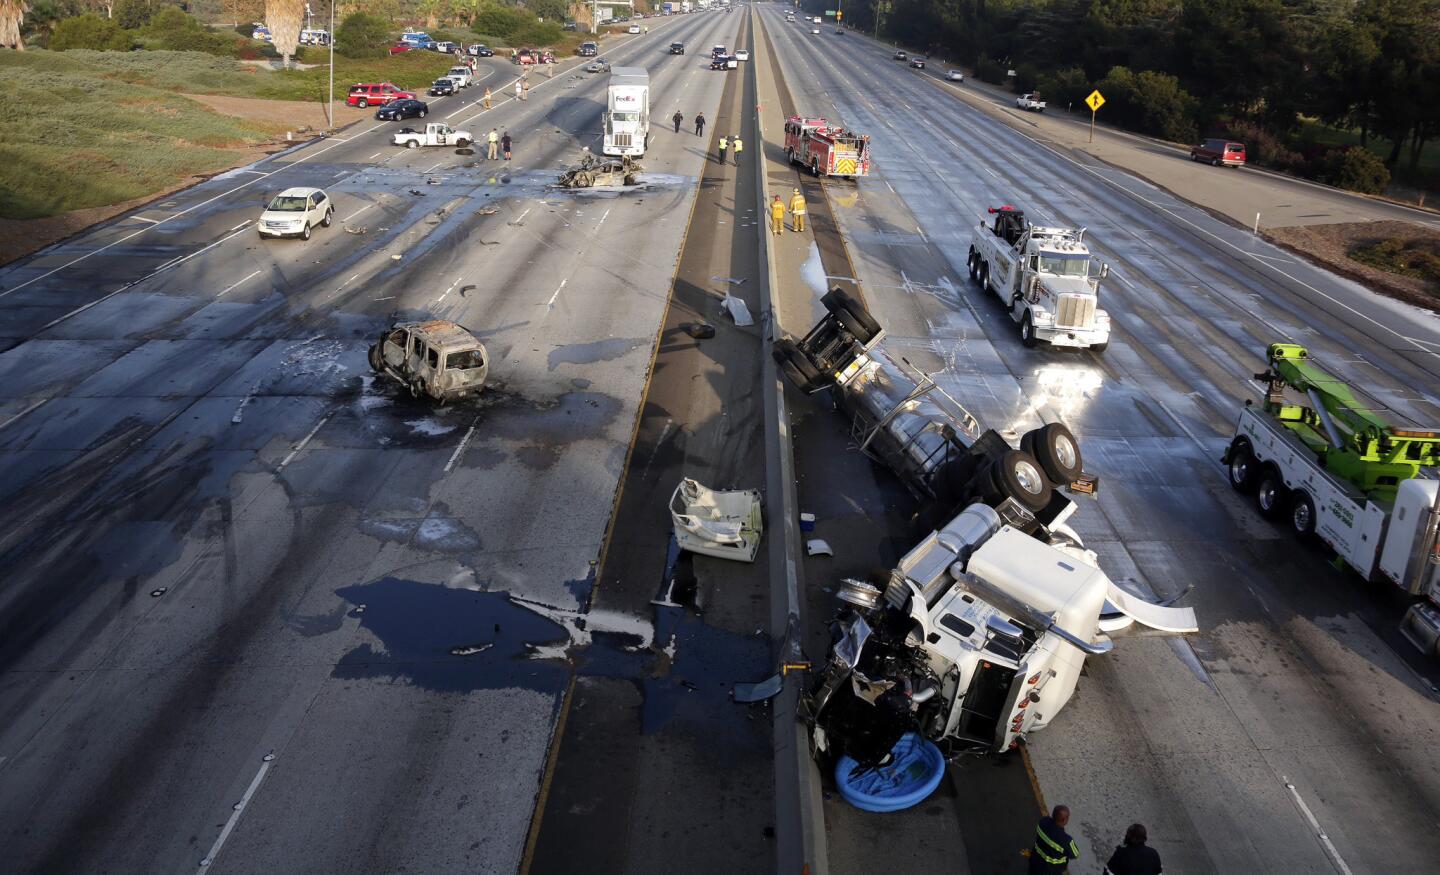 Cleanup continues after a crash involving multiple vehicles, including a milk tanker that overturned, shutting down both sides of the 60 Freeway near South El Monte.